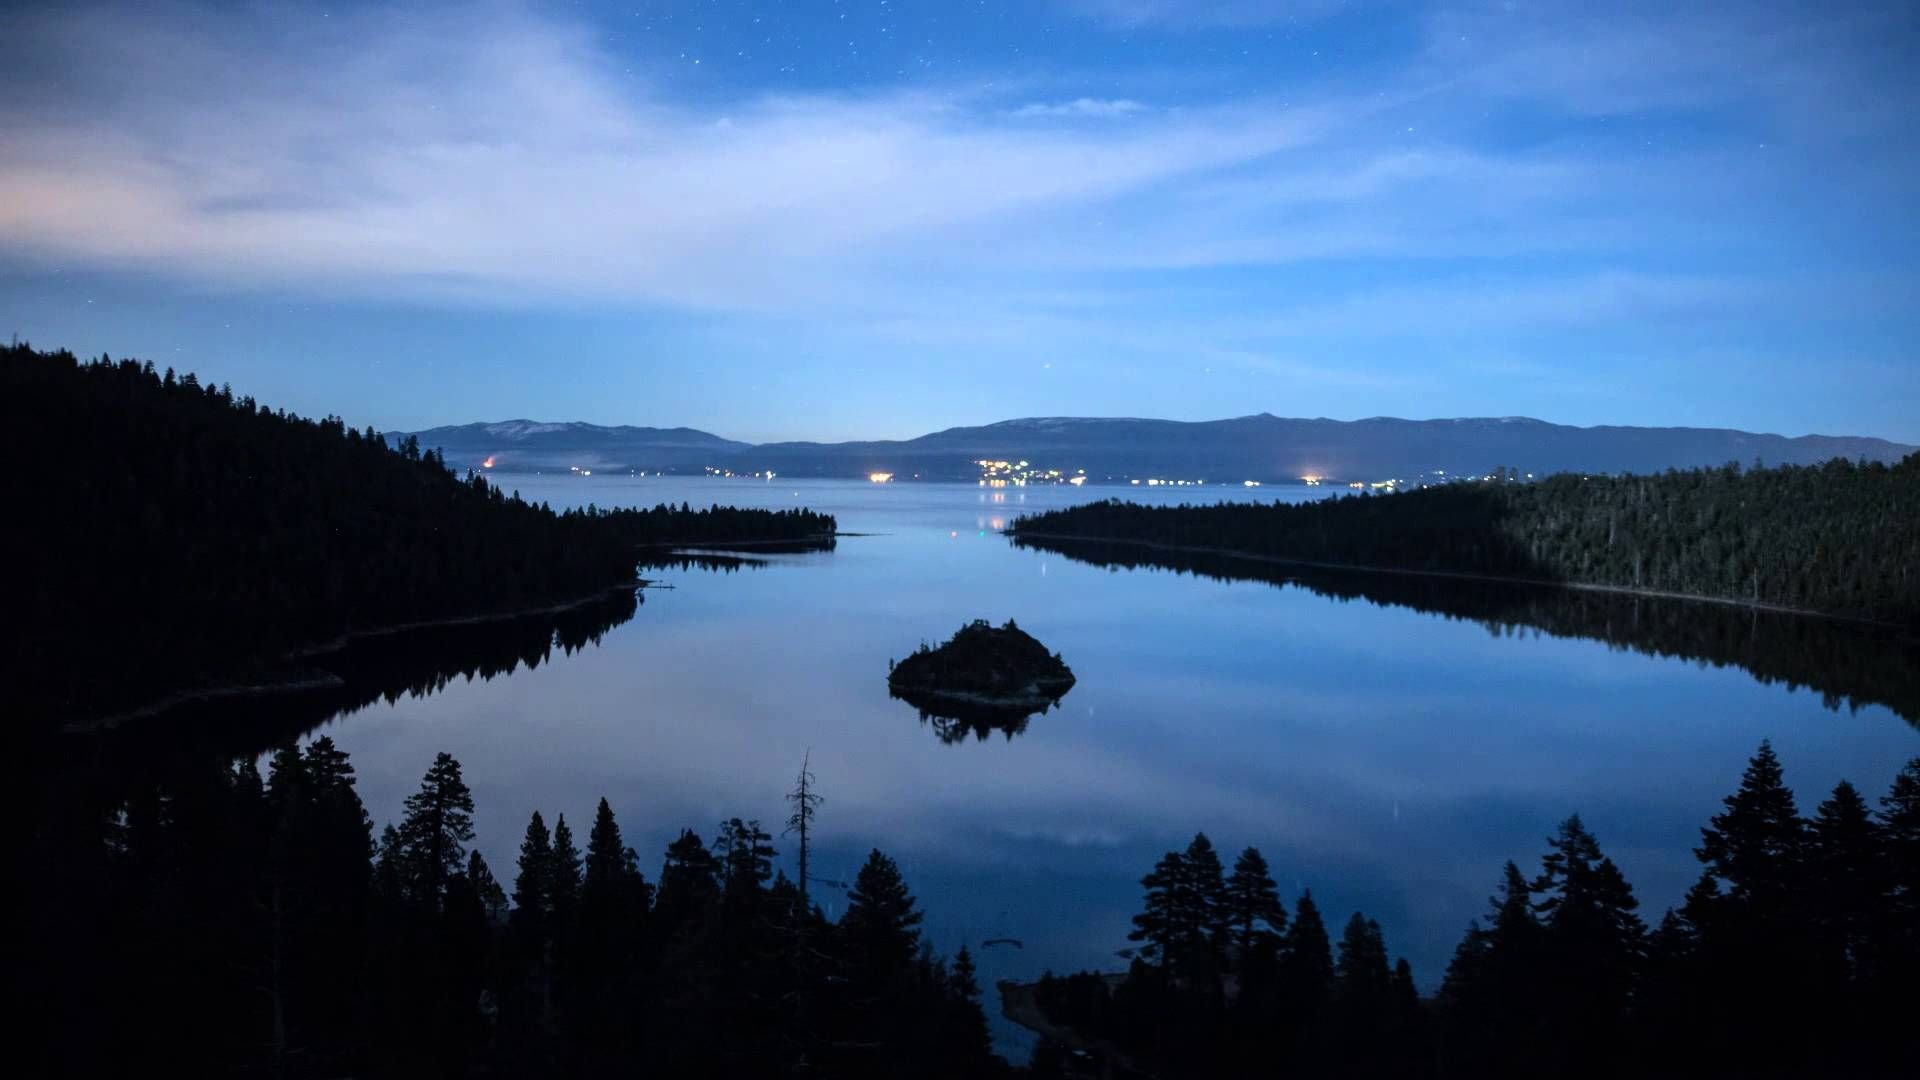 Night time lapse photography, Emerald Bay, South Lake Tahoe, Tranquil ambiance, 1920x1080 Full HD Desktop